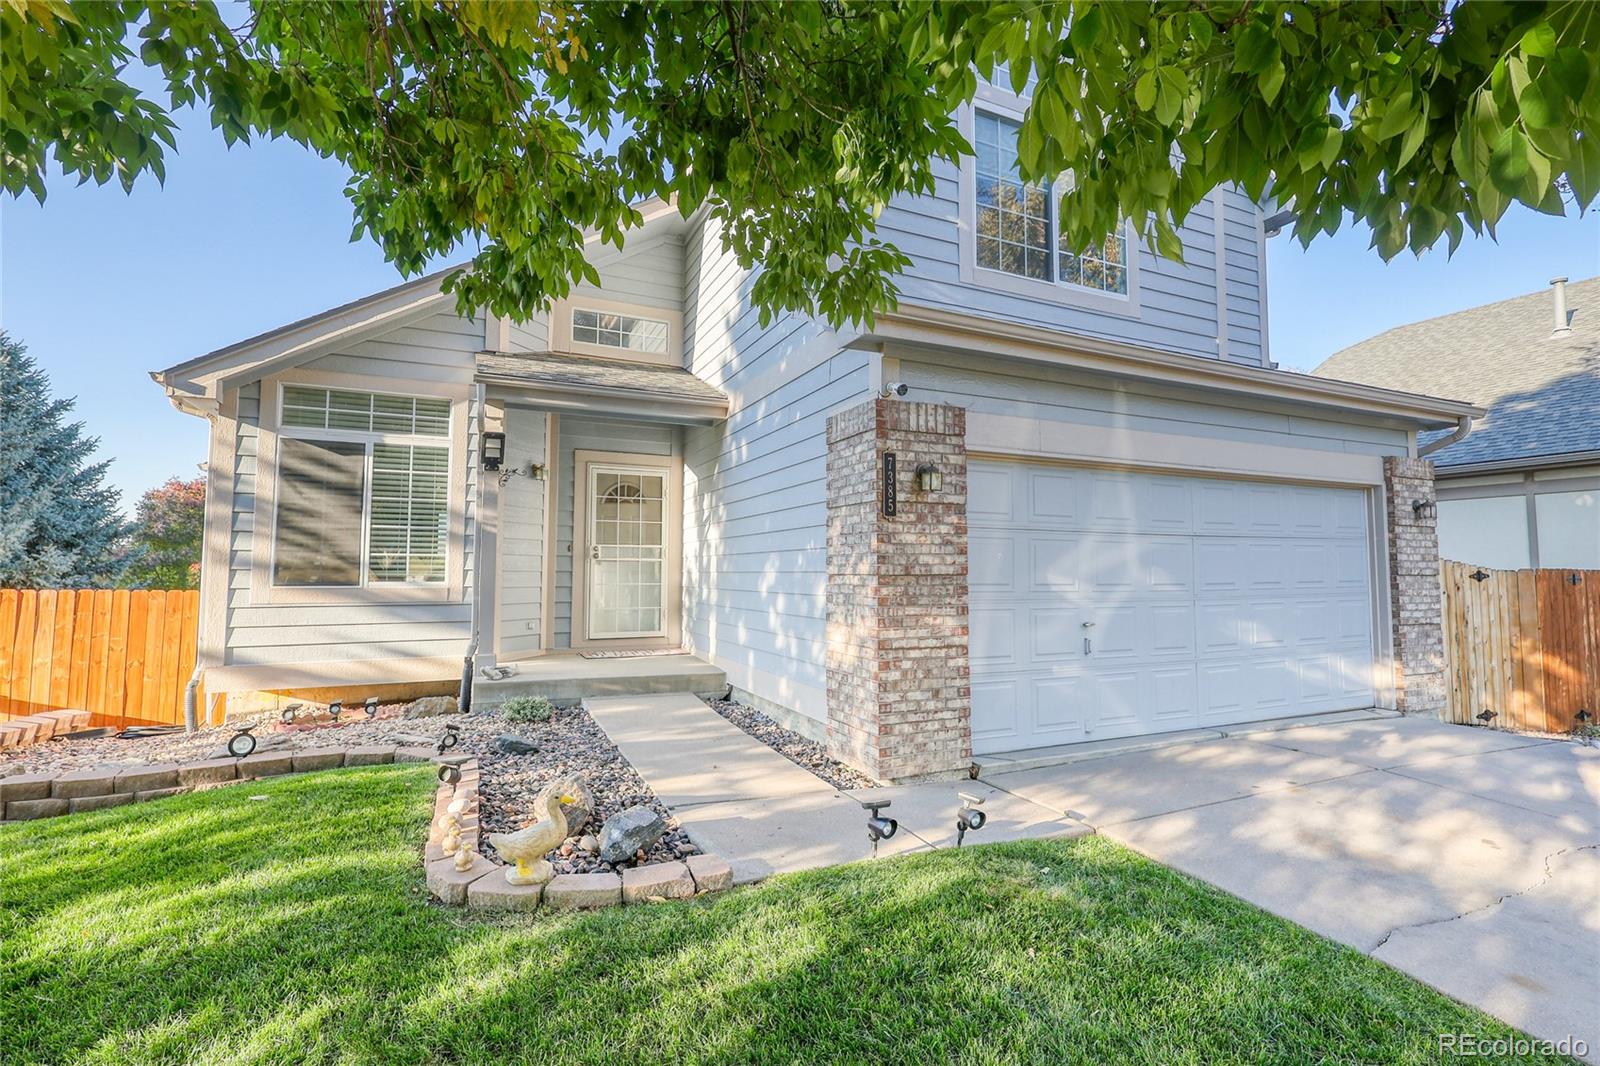 Report Image for 7385 W 97th Place,Westminster, Colorado